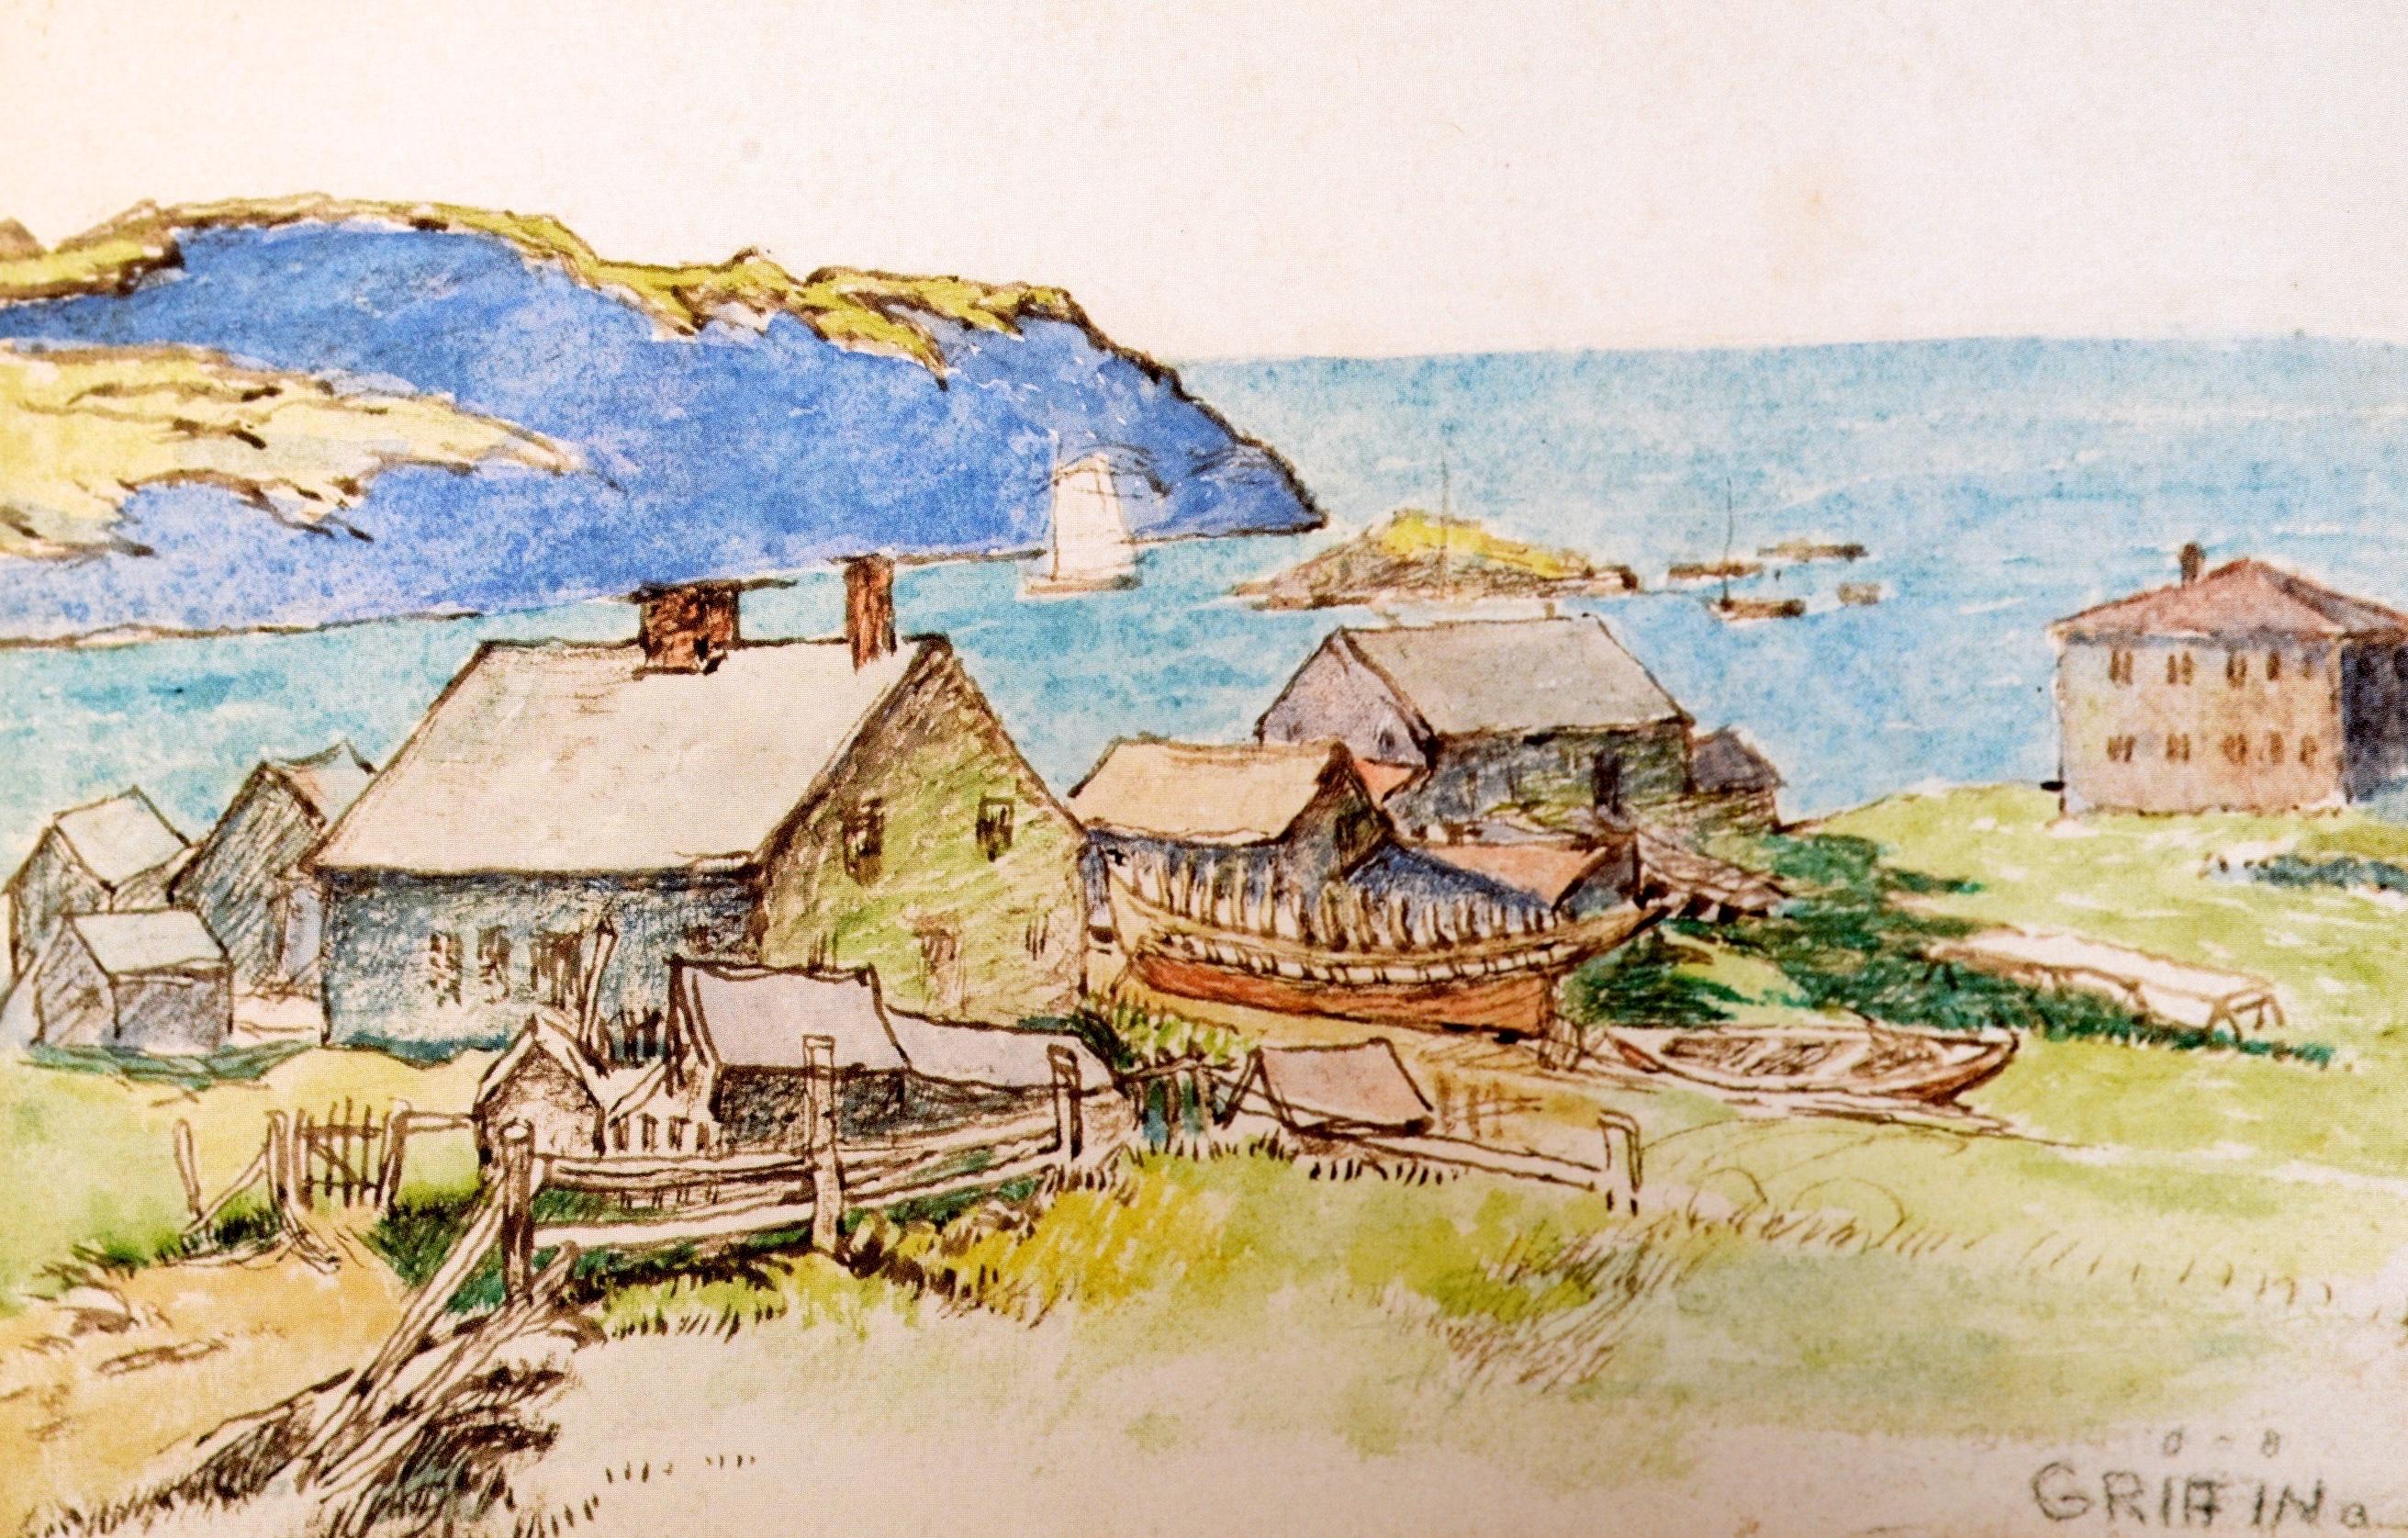 The Monhegan Museum Celebrating Fifty Years, 1968-2018 by Edward Deci. its Ed hardcover with dust jacket. Monhegan, nearly 12 nautical miles offshore, nearly everything a person needs must be brought in by boat. There are no cars on the island, so